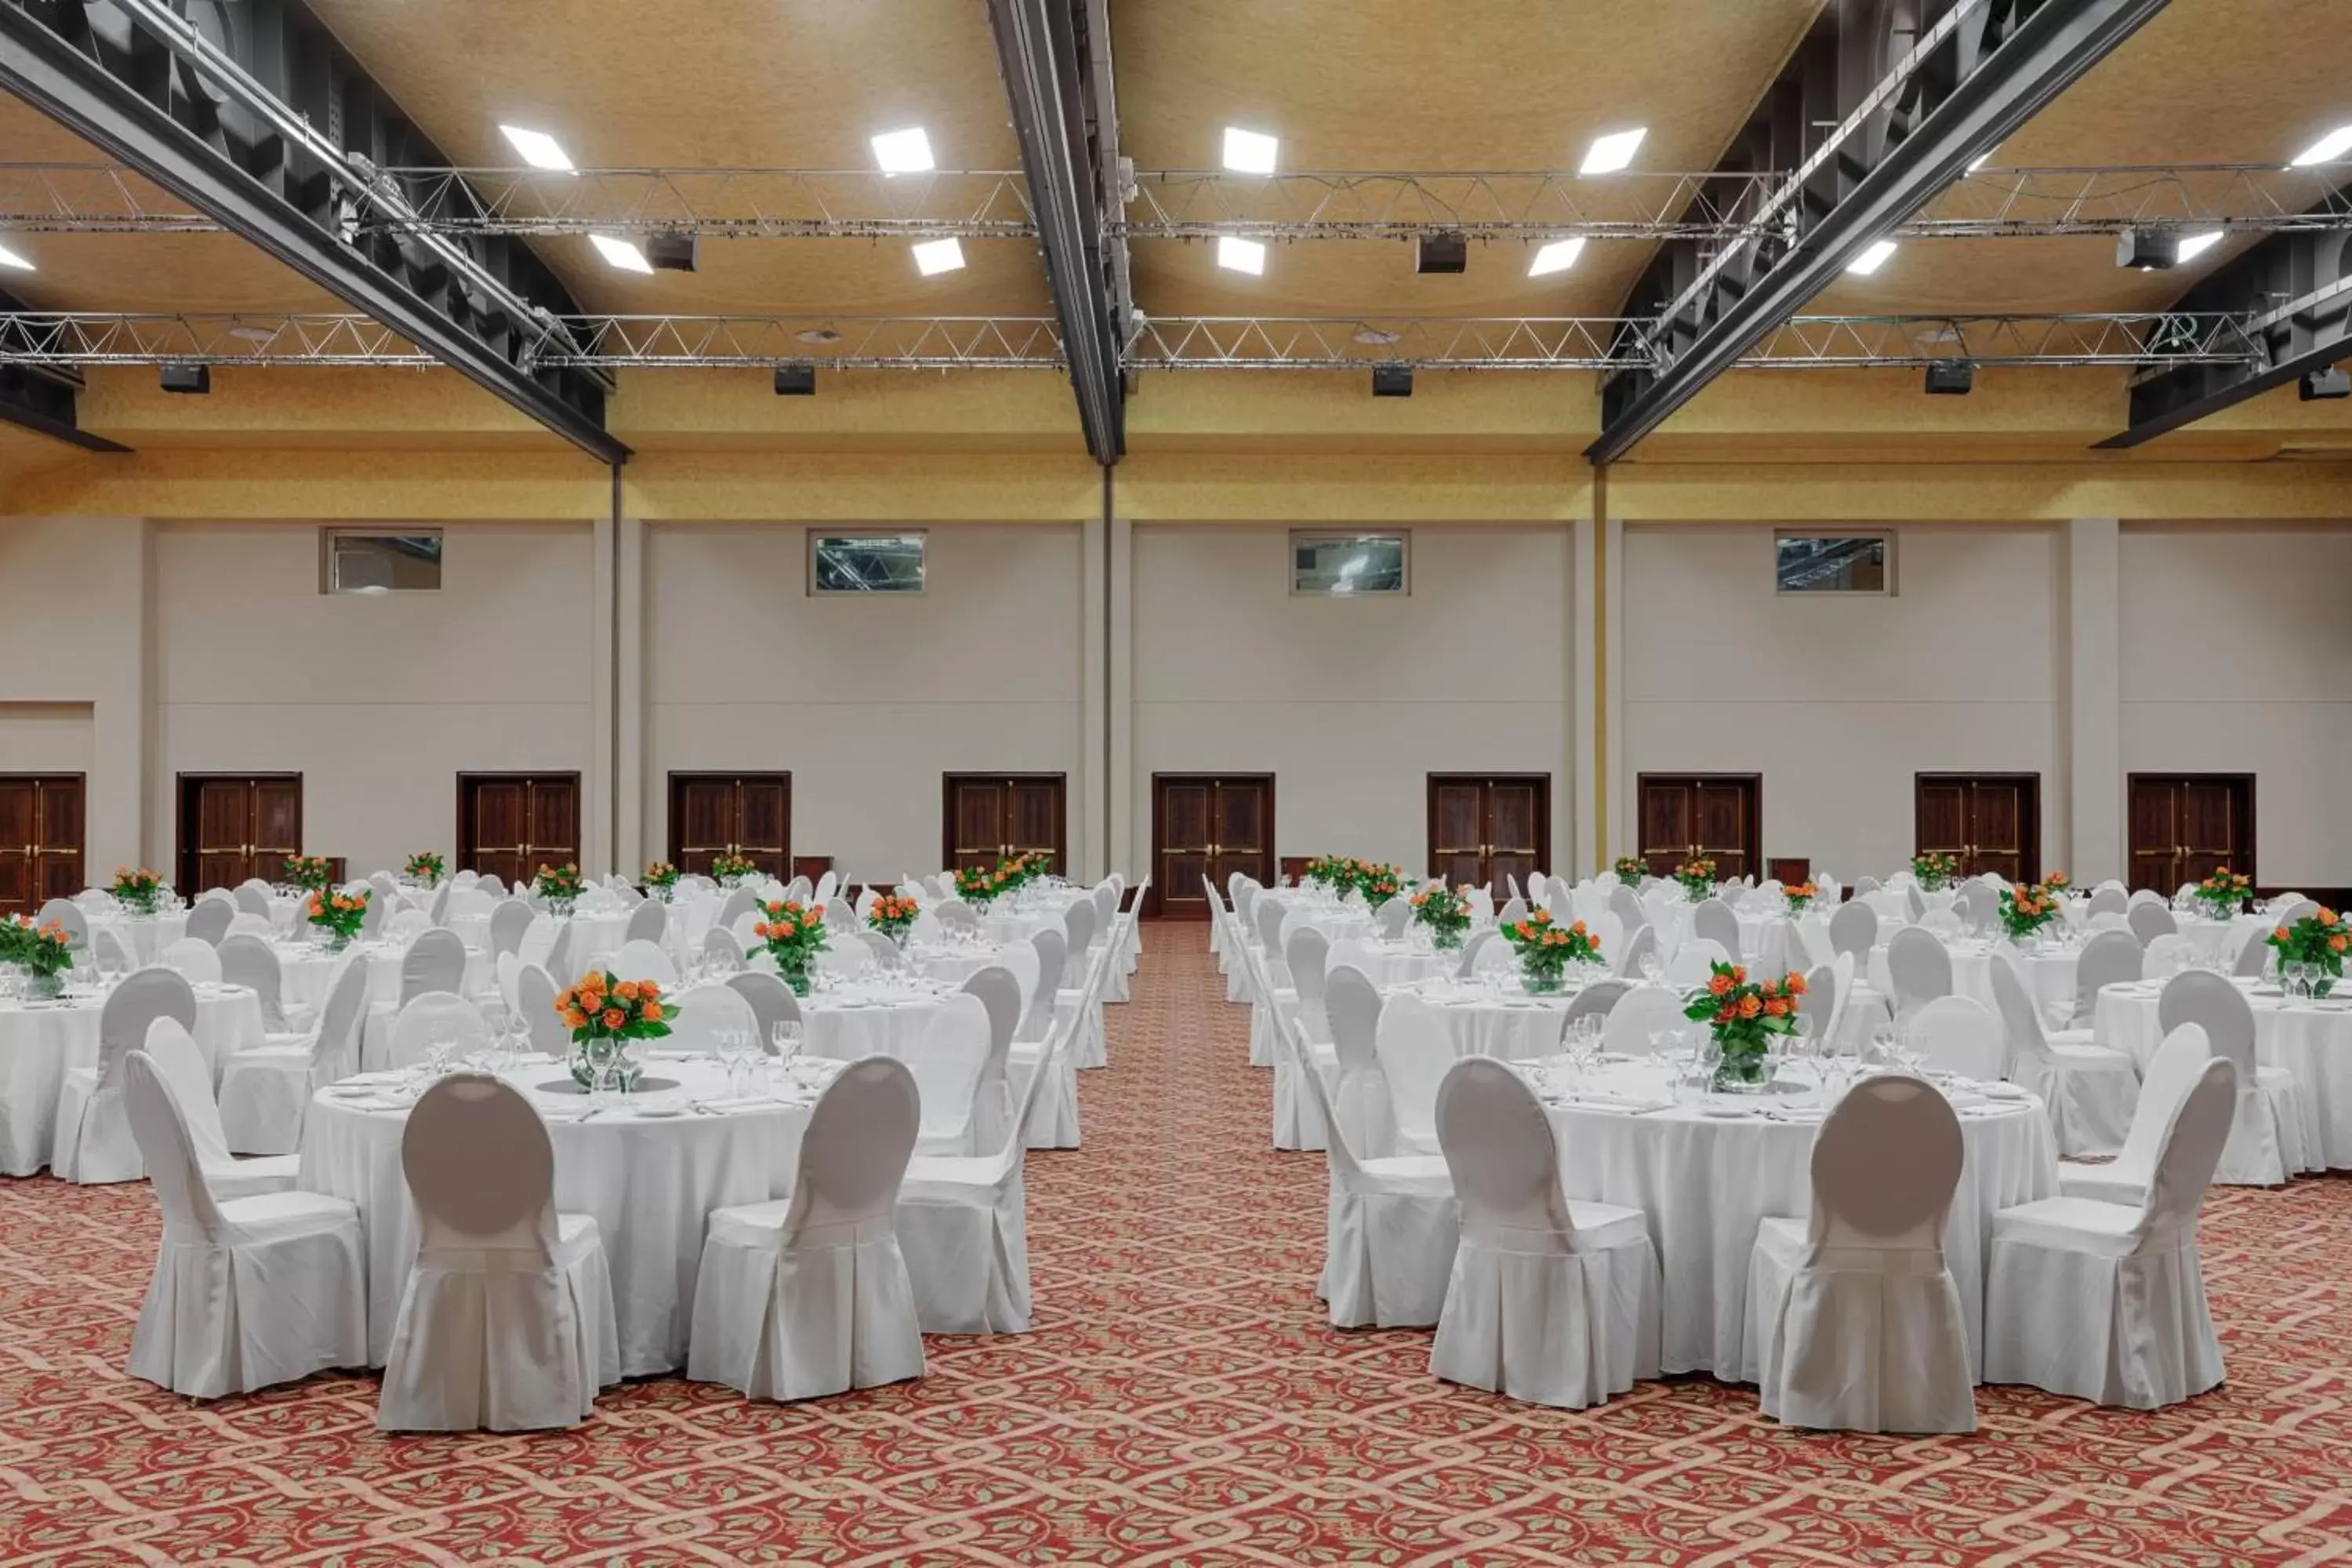 Meeting/conference room, Banquet Facilities in Rome Marriott Park Hotel